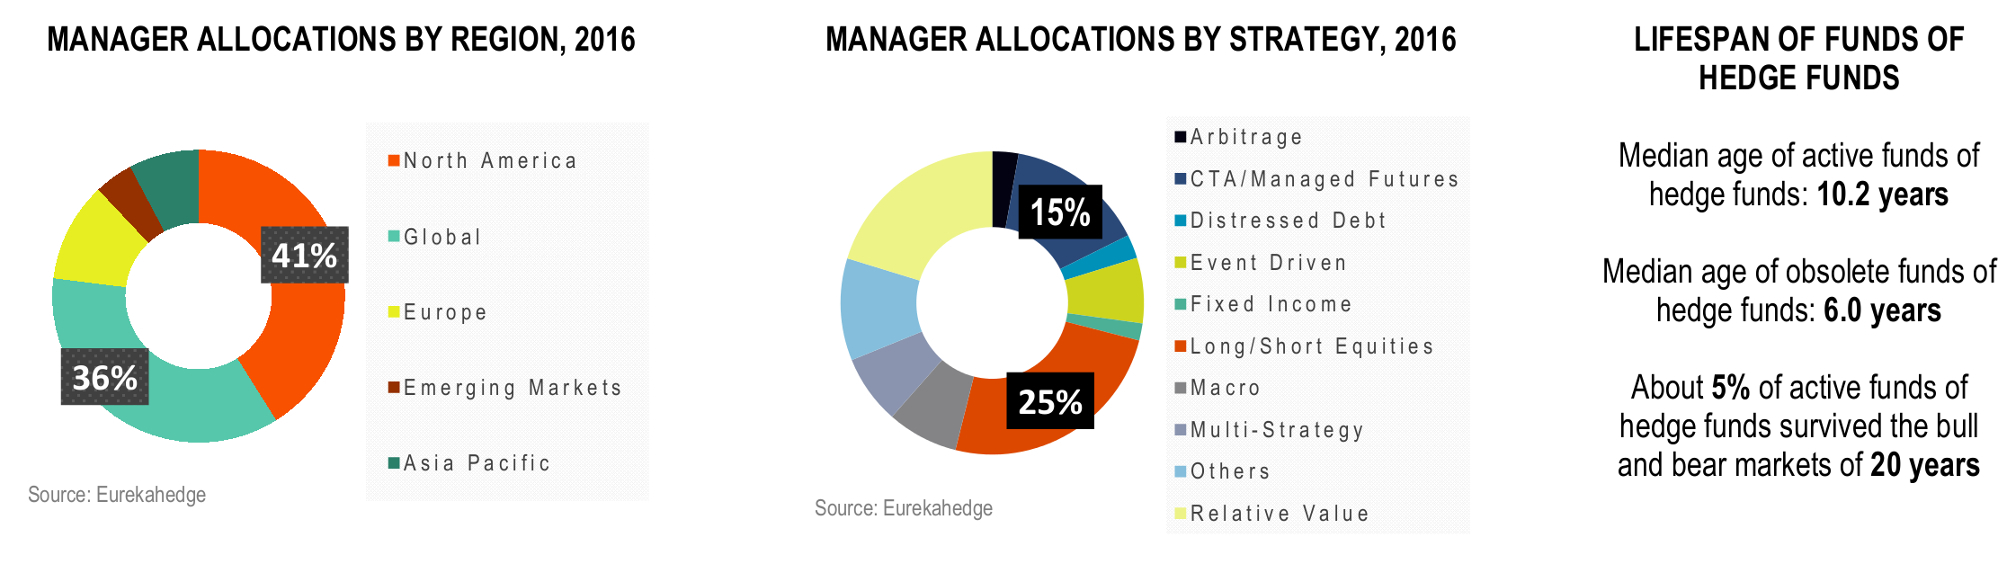 Funds of Hedge Funds Infographic May 2016 - Funds of hedge funds manager allocations by region and strategy, median lifespans